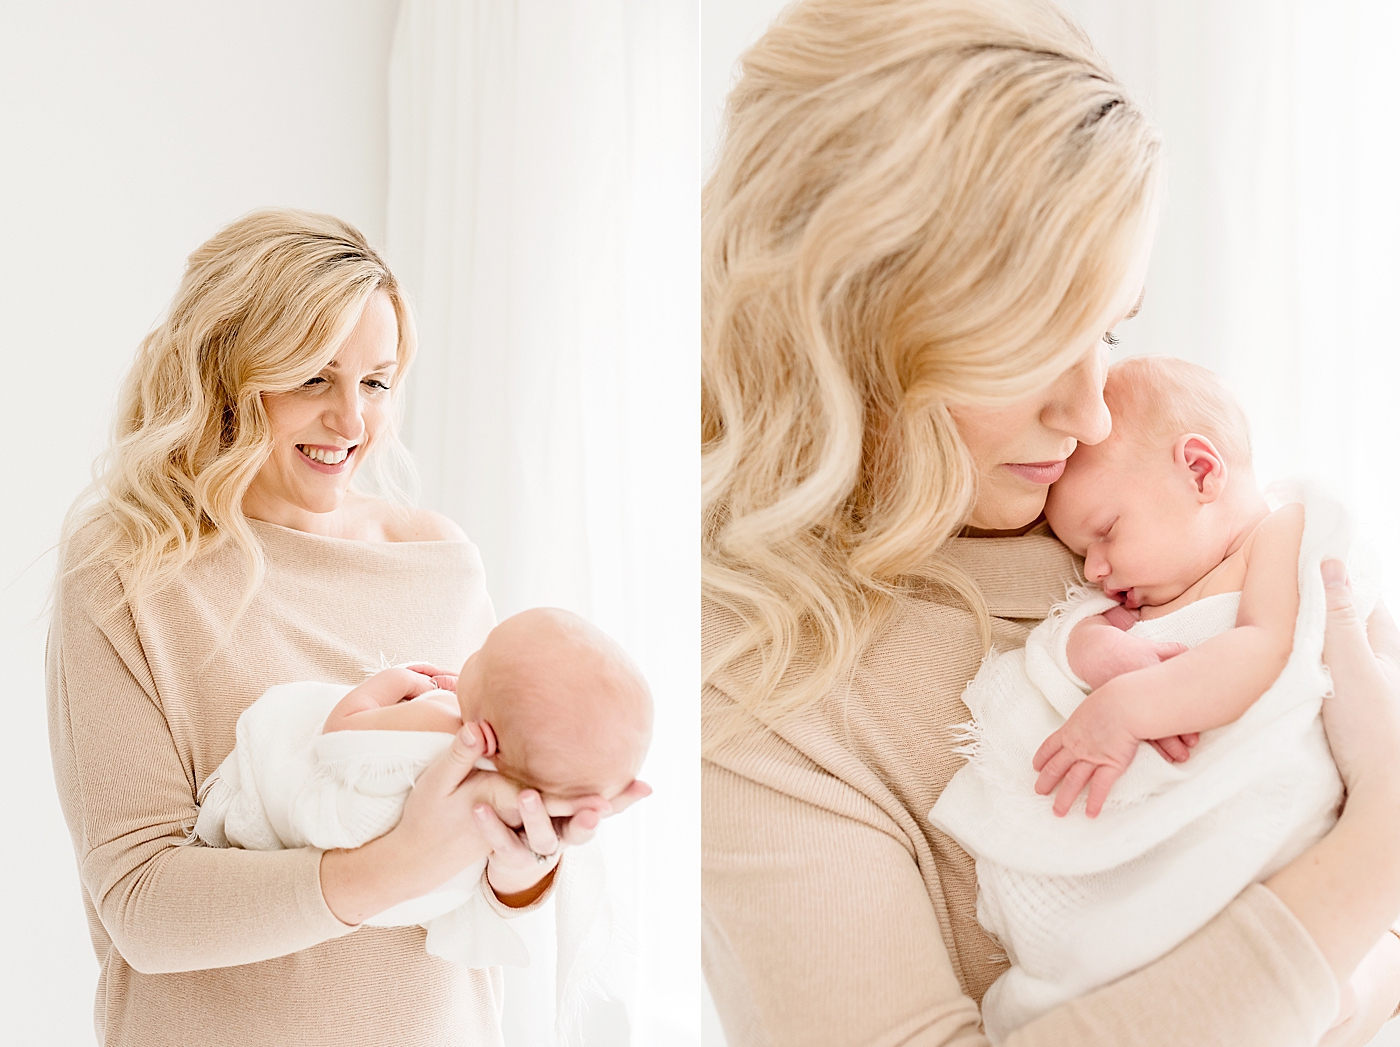 Mom in cream dress holding baby boy in studio newborn session in Denver NC | Photo by Anna Wisjo Photography